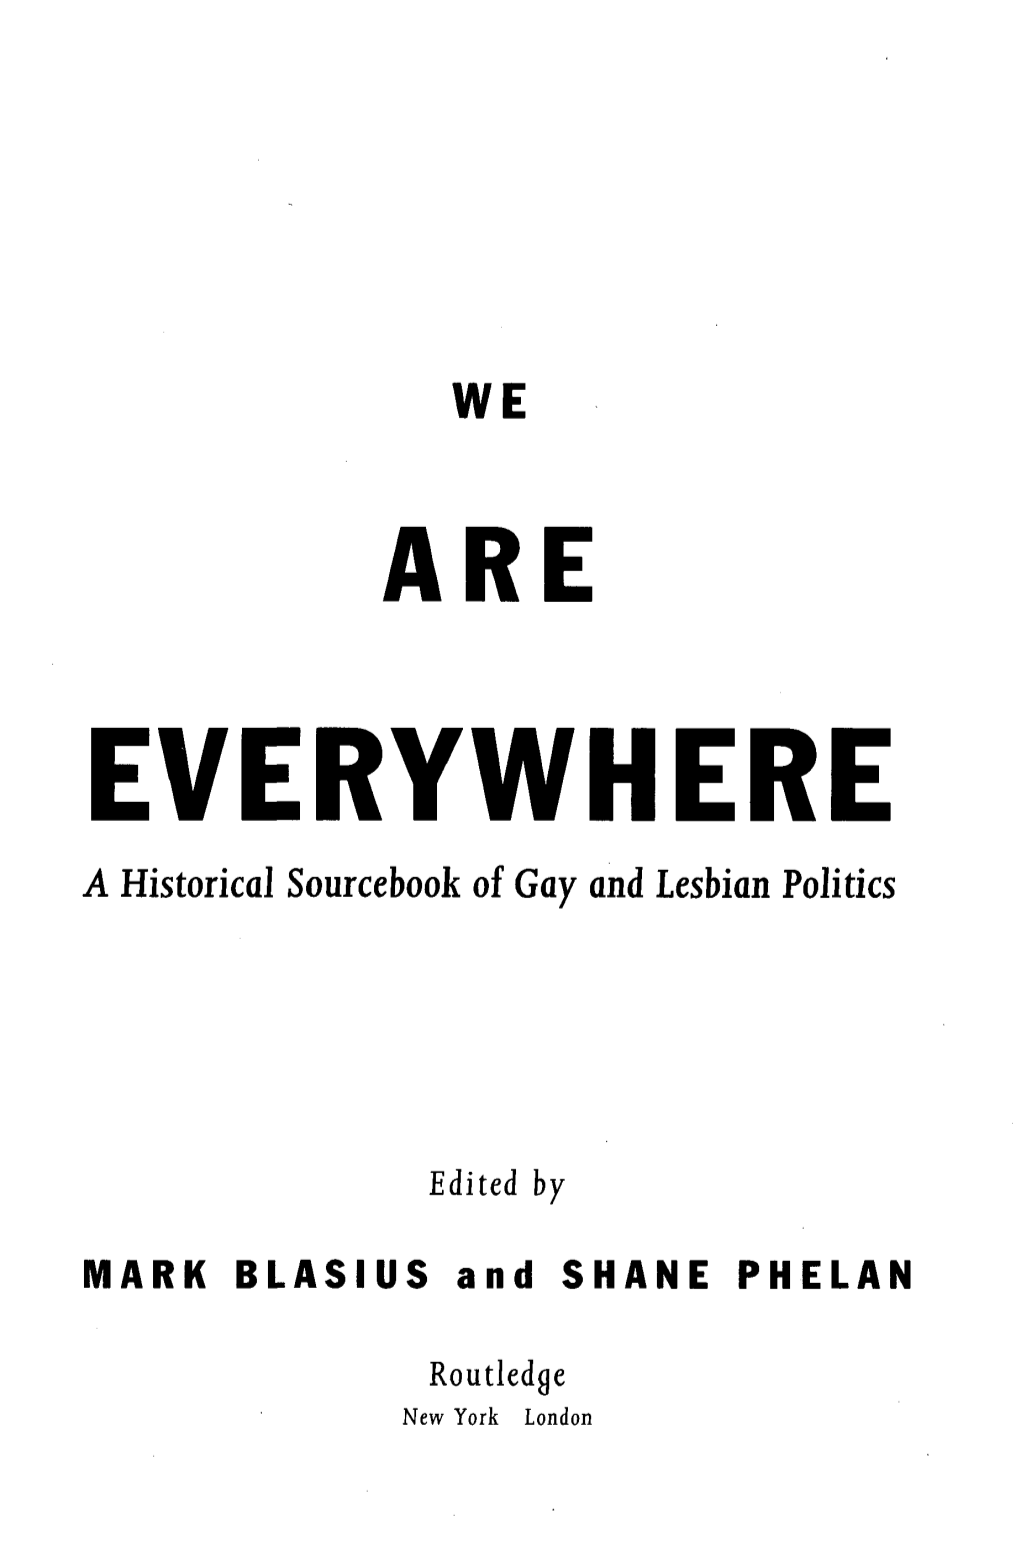 WE ARE EVERYWHERE a Historical Sourcebook of Gay and Lesbian Politics